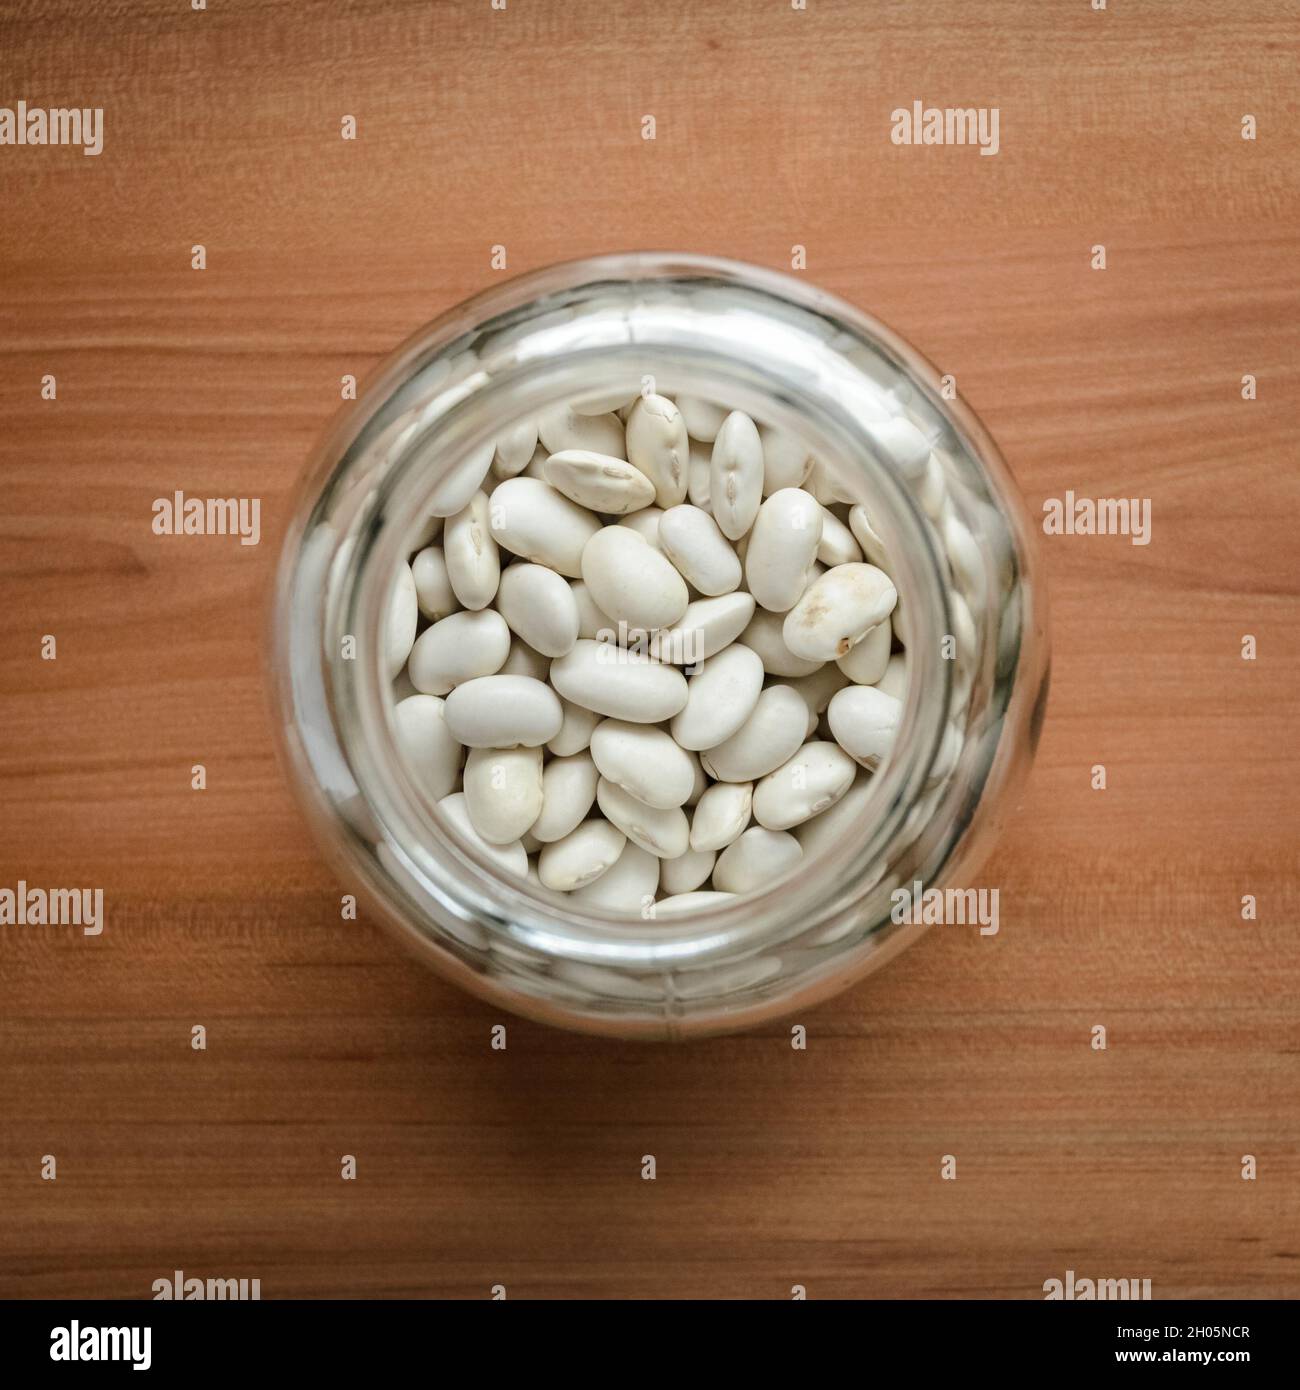 White beans (Phaseolus vulgaris) in a glass jar on wooden desk, flat lay view from directly above Stock Photo